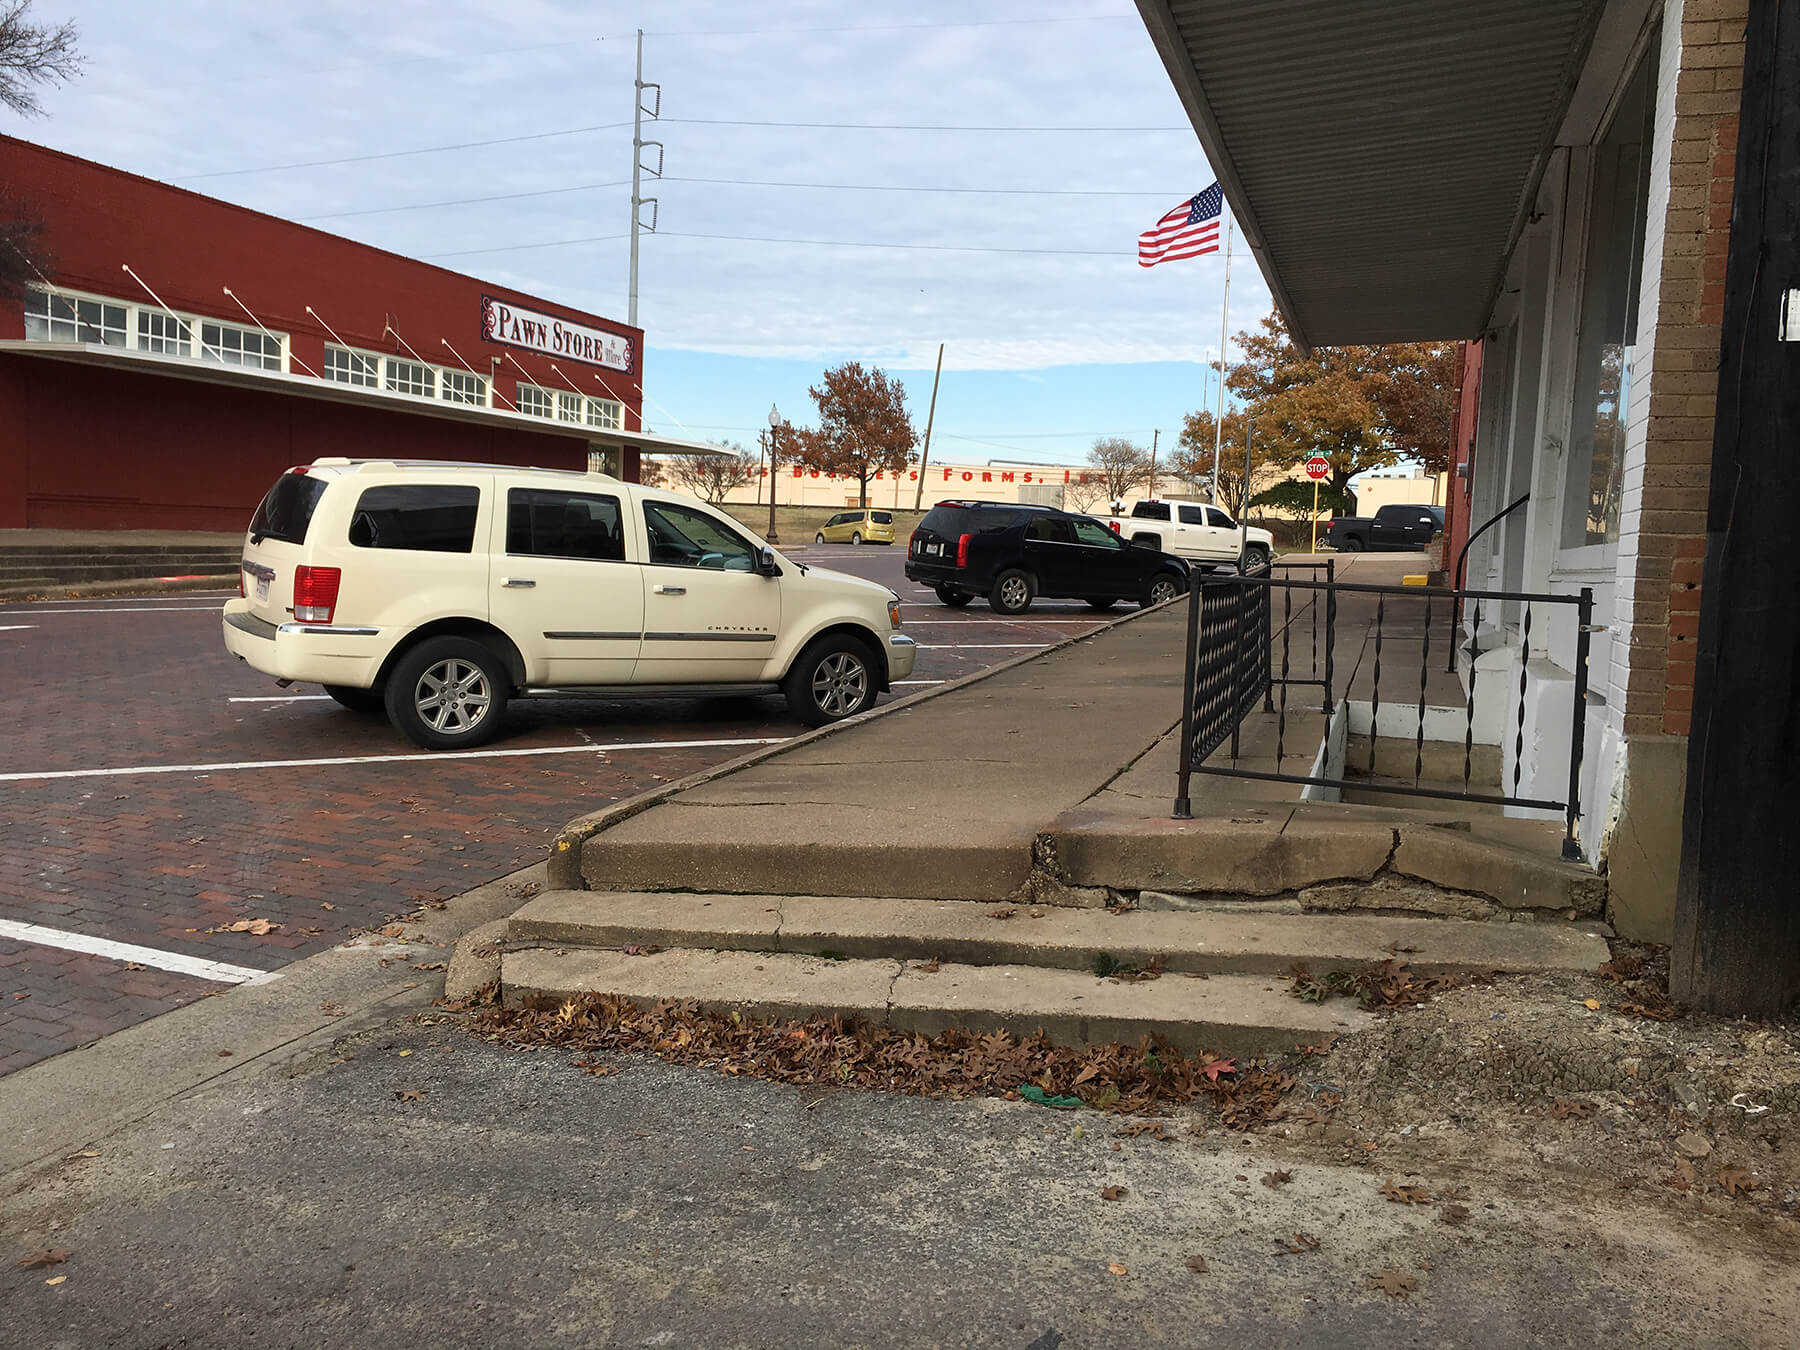 White SUV parked in downtown Ennis prior to construction